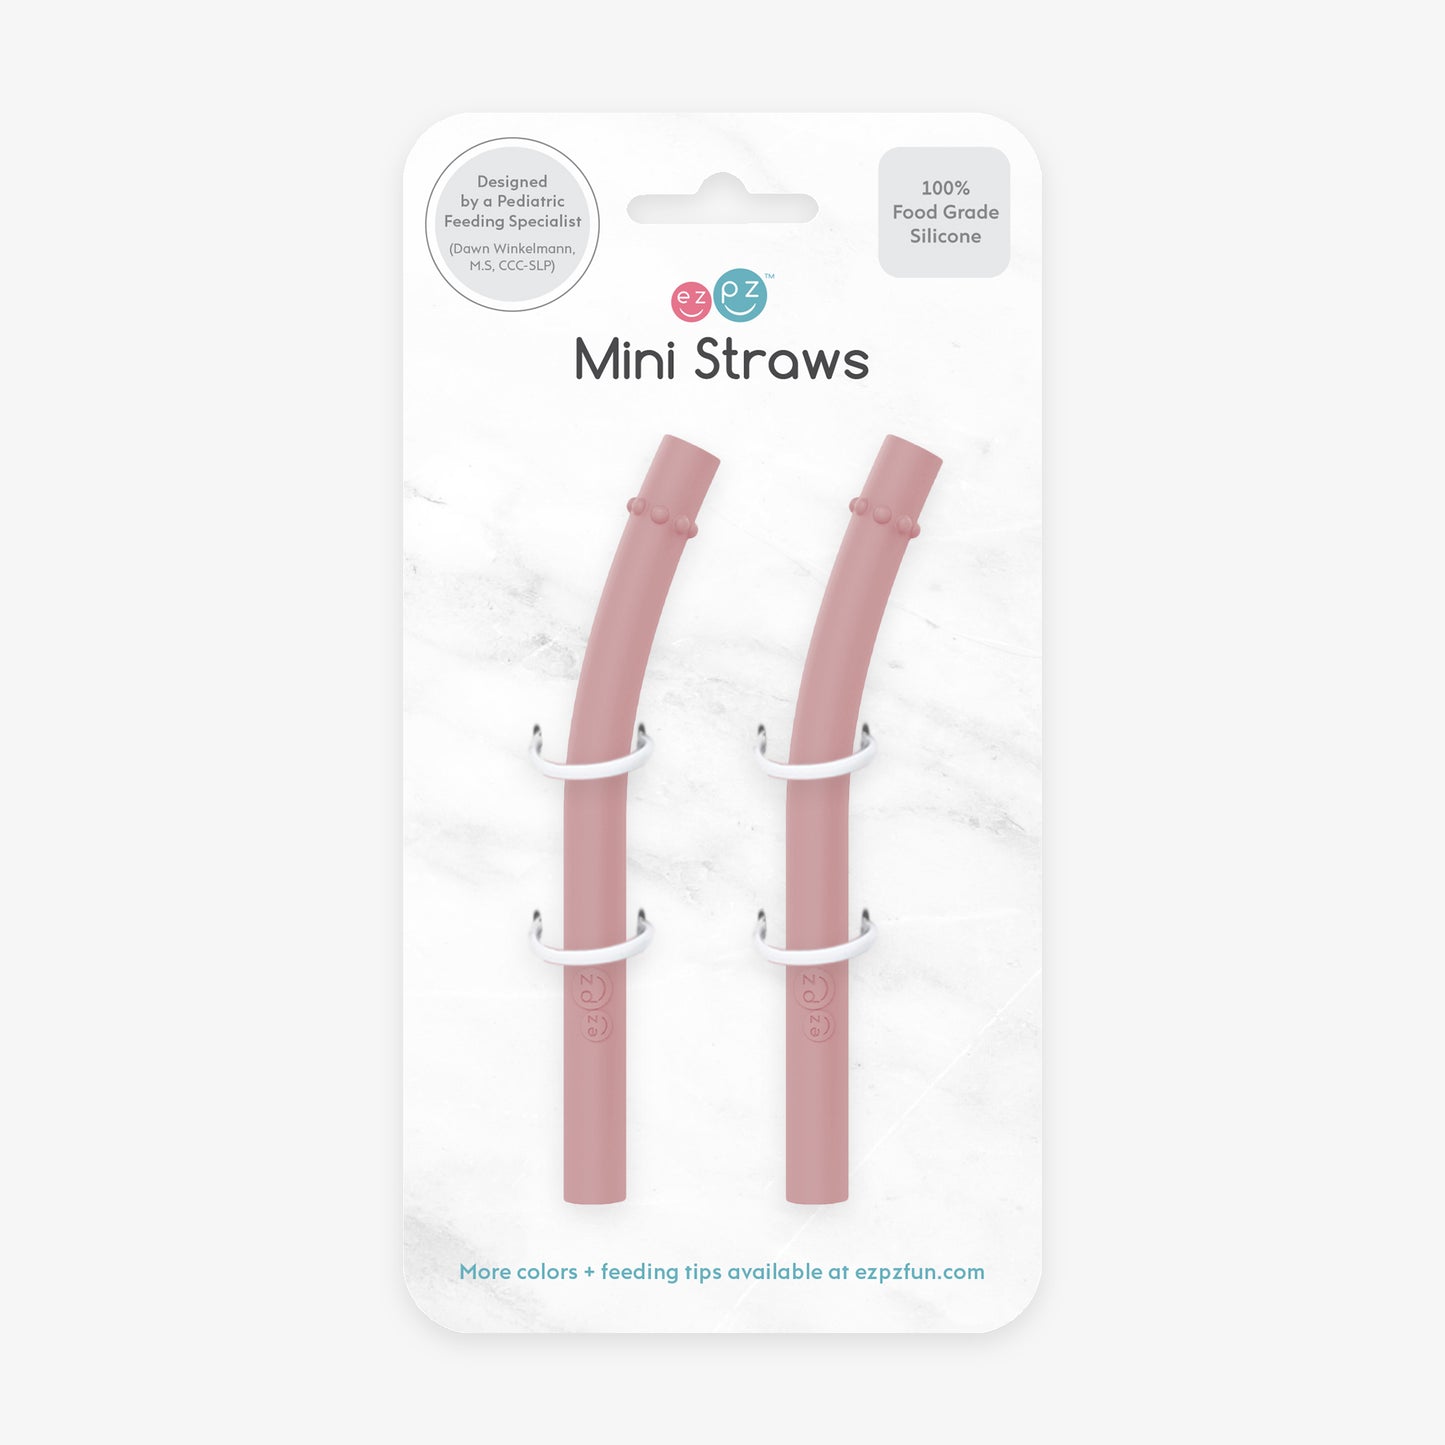 Mini Straws in Blush / Silicone Straw Replacement Pack for the ezpz Mini Cup & Straw System